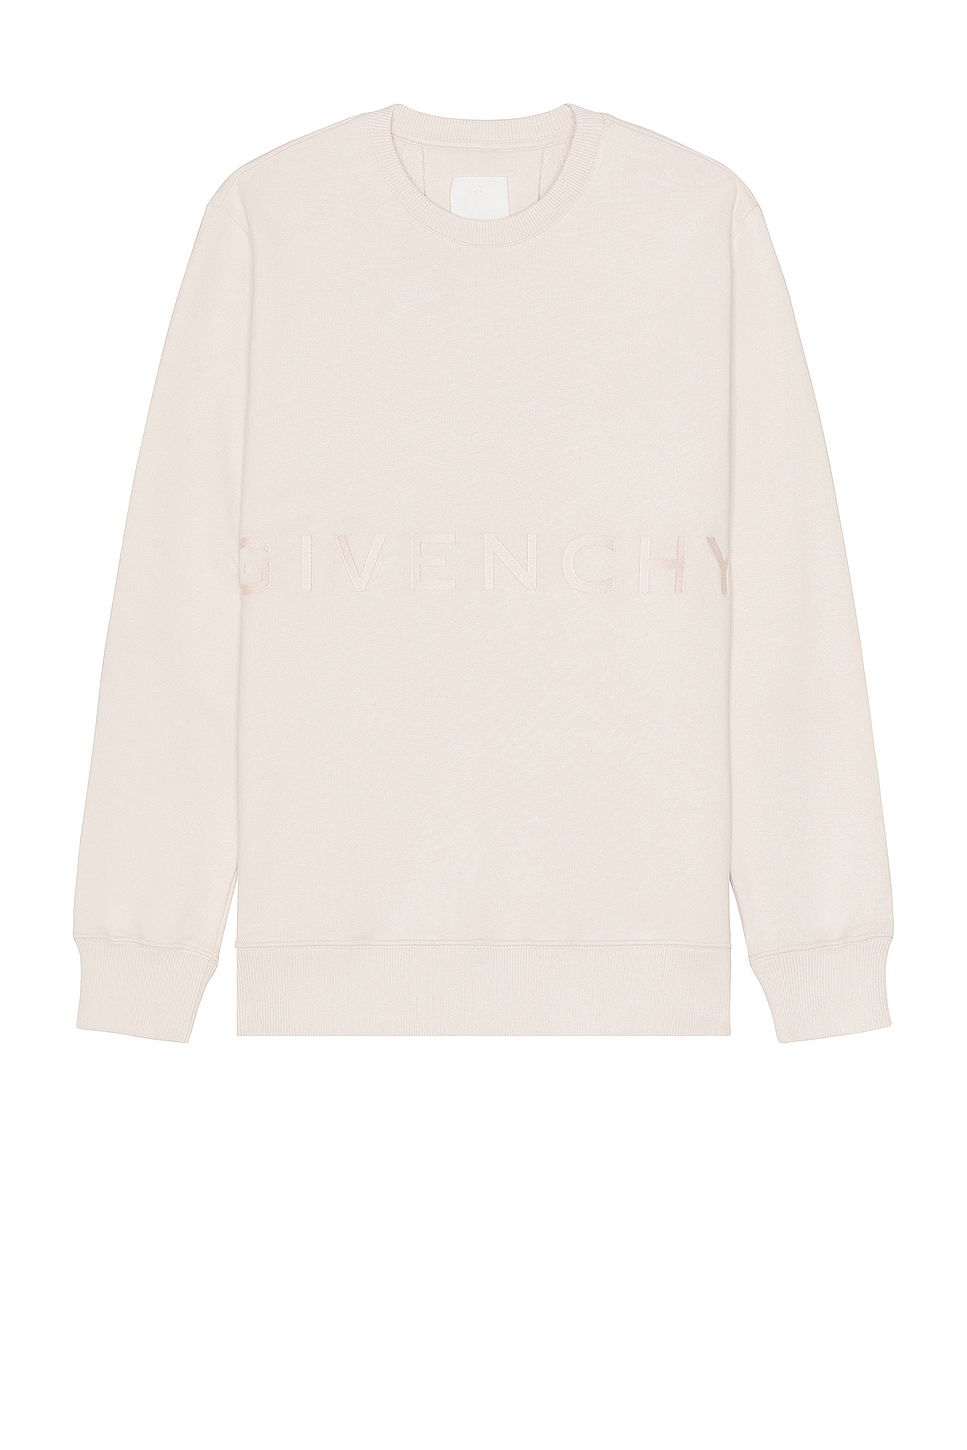 Image 1 of Givenchy Slim Fit Sweater in Nude Pink